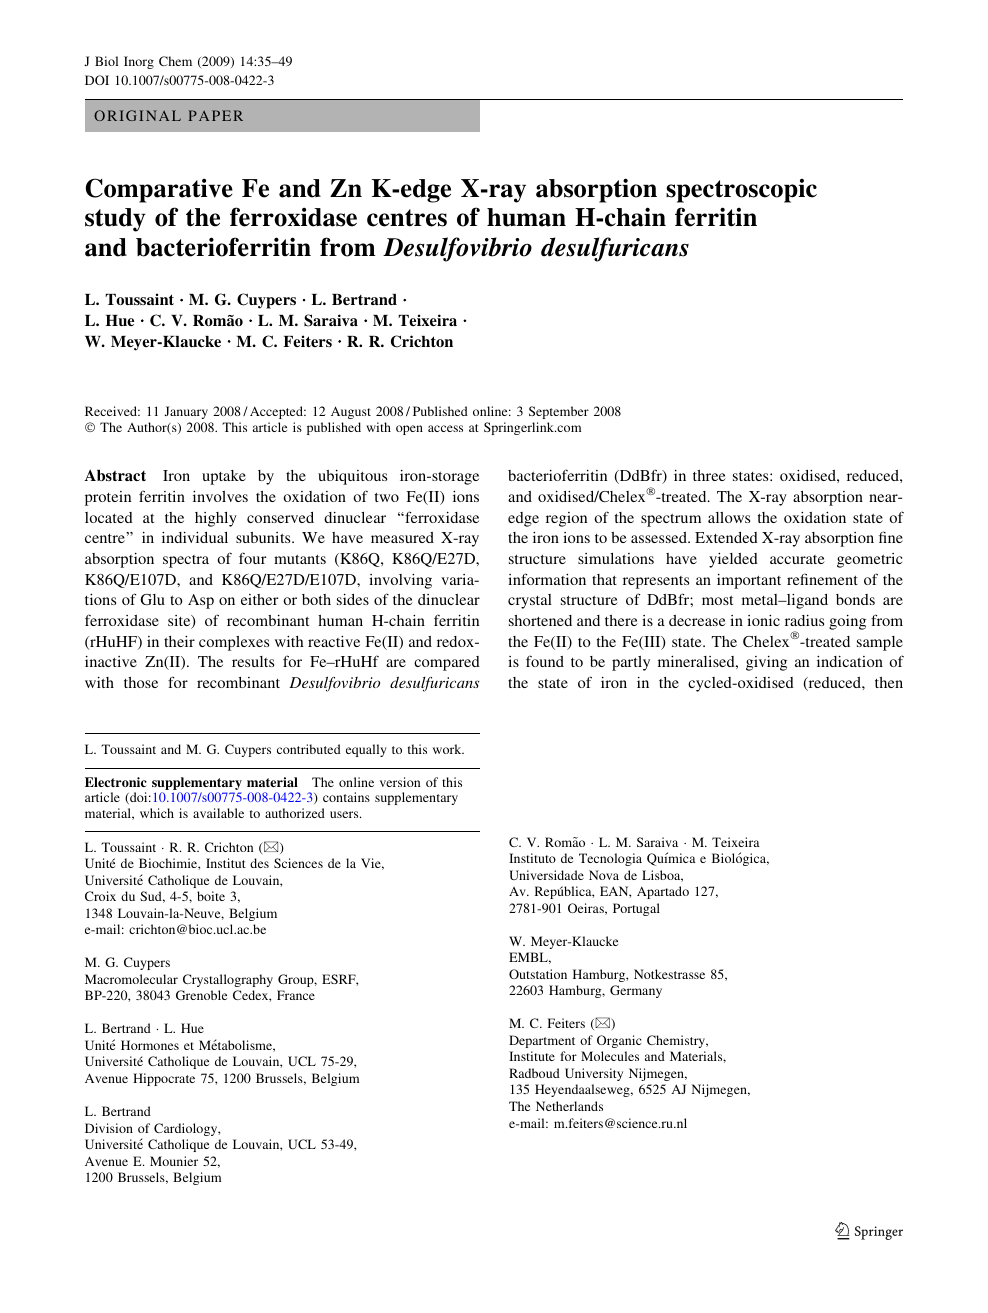 Comparative Fe And Zn K Edge X Ray Absorption Spectroscopic Study Of The Ferroxidase Centres Of Human H Chain Ferritin And Bacterioferritin From Desulfovibrio Desulfuricans Topic Of Research Paper In Chemical Sciences Download Scholarly